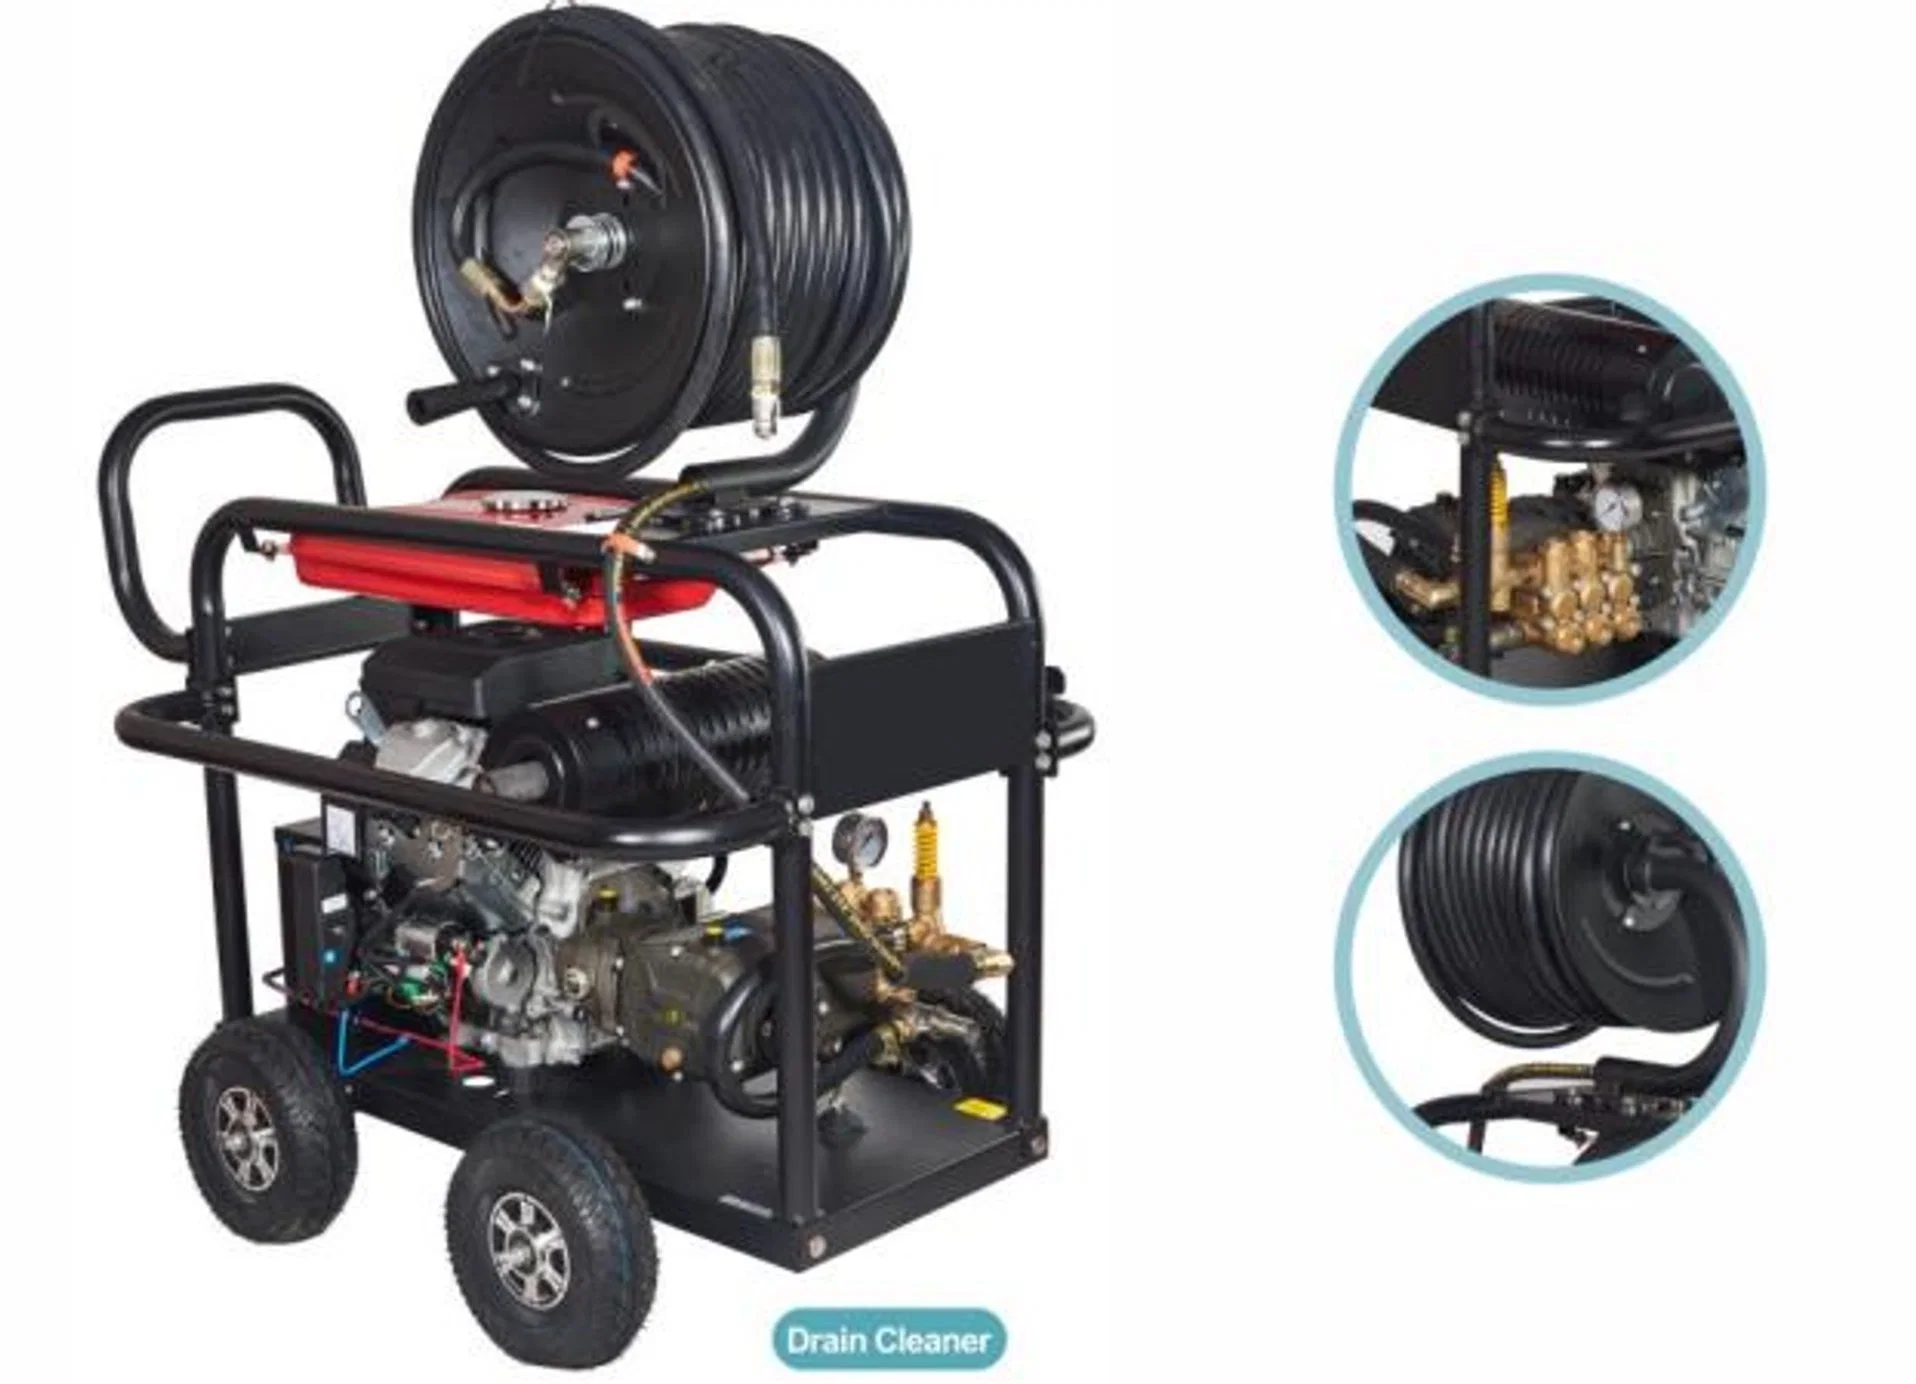 Bison 2700-200psi 50-40 Lpm Jet Cleaner Sewer Drain Cleaning High Pressure Washer